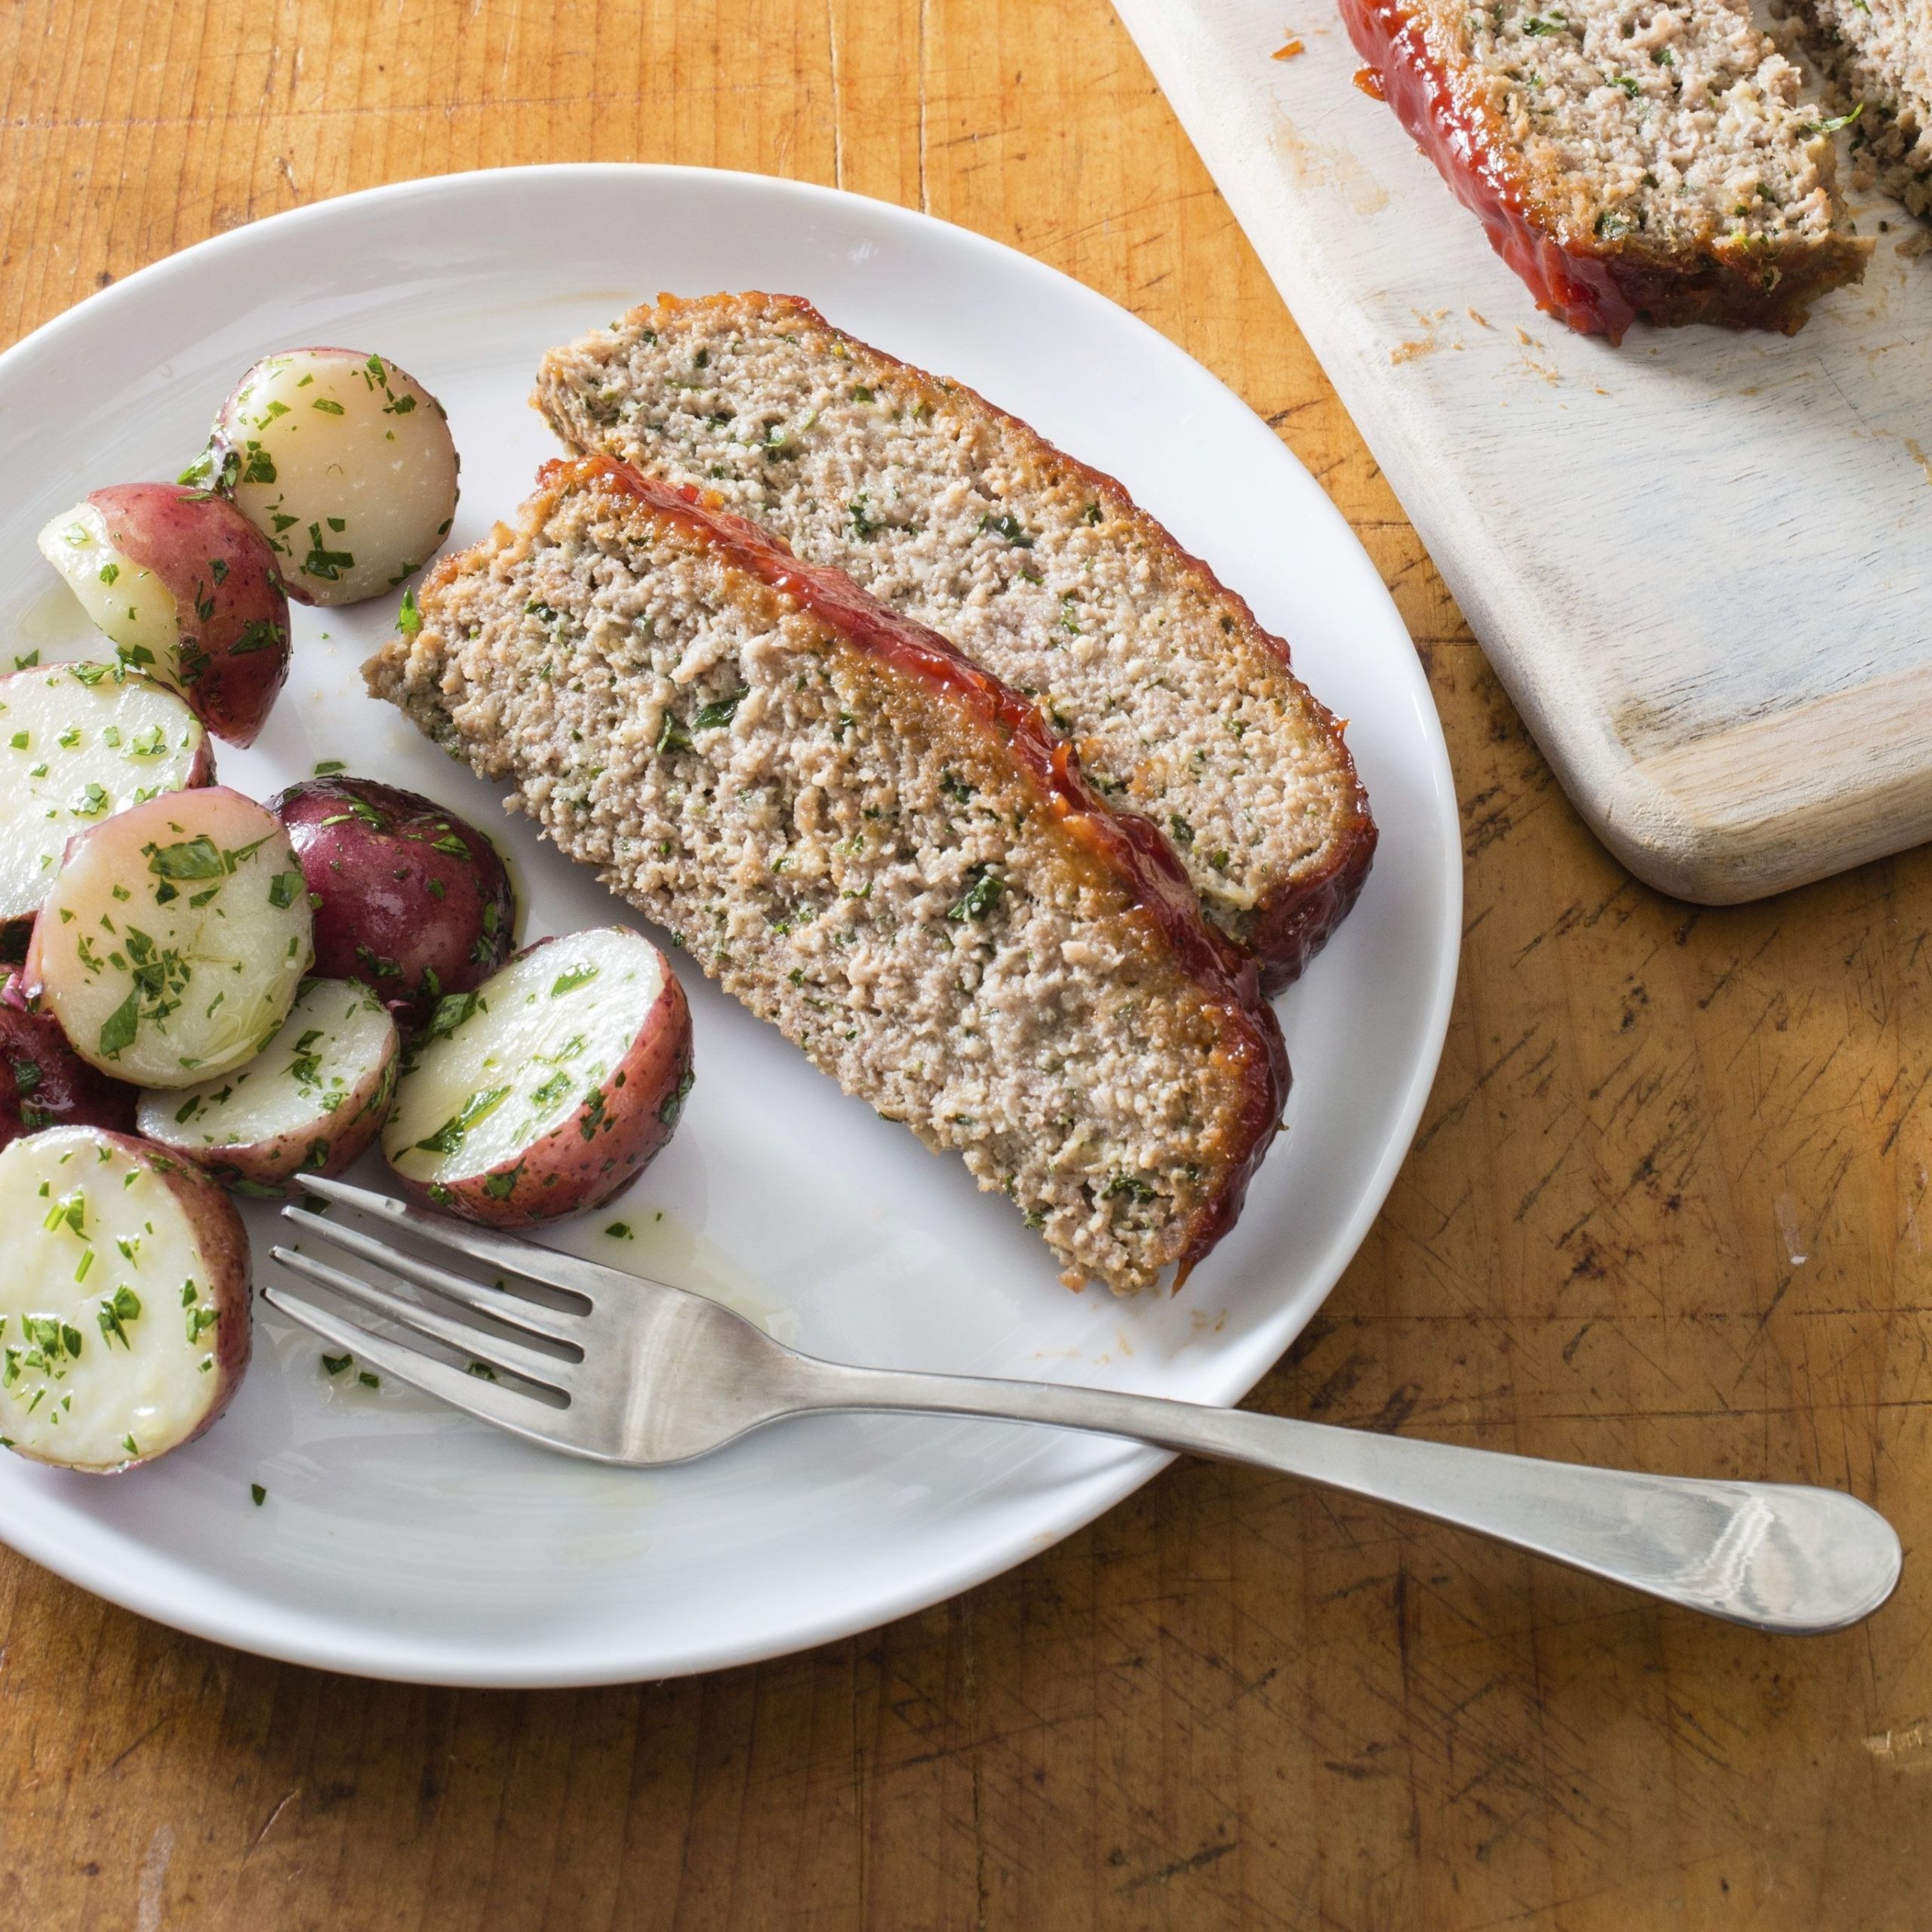 America'S Test Kitchen Turkey Meatloaf
 Our turkey meatloaf offers a lighter take on the classic